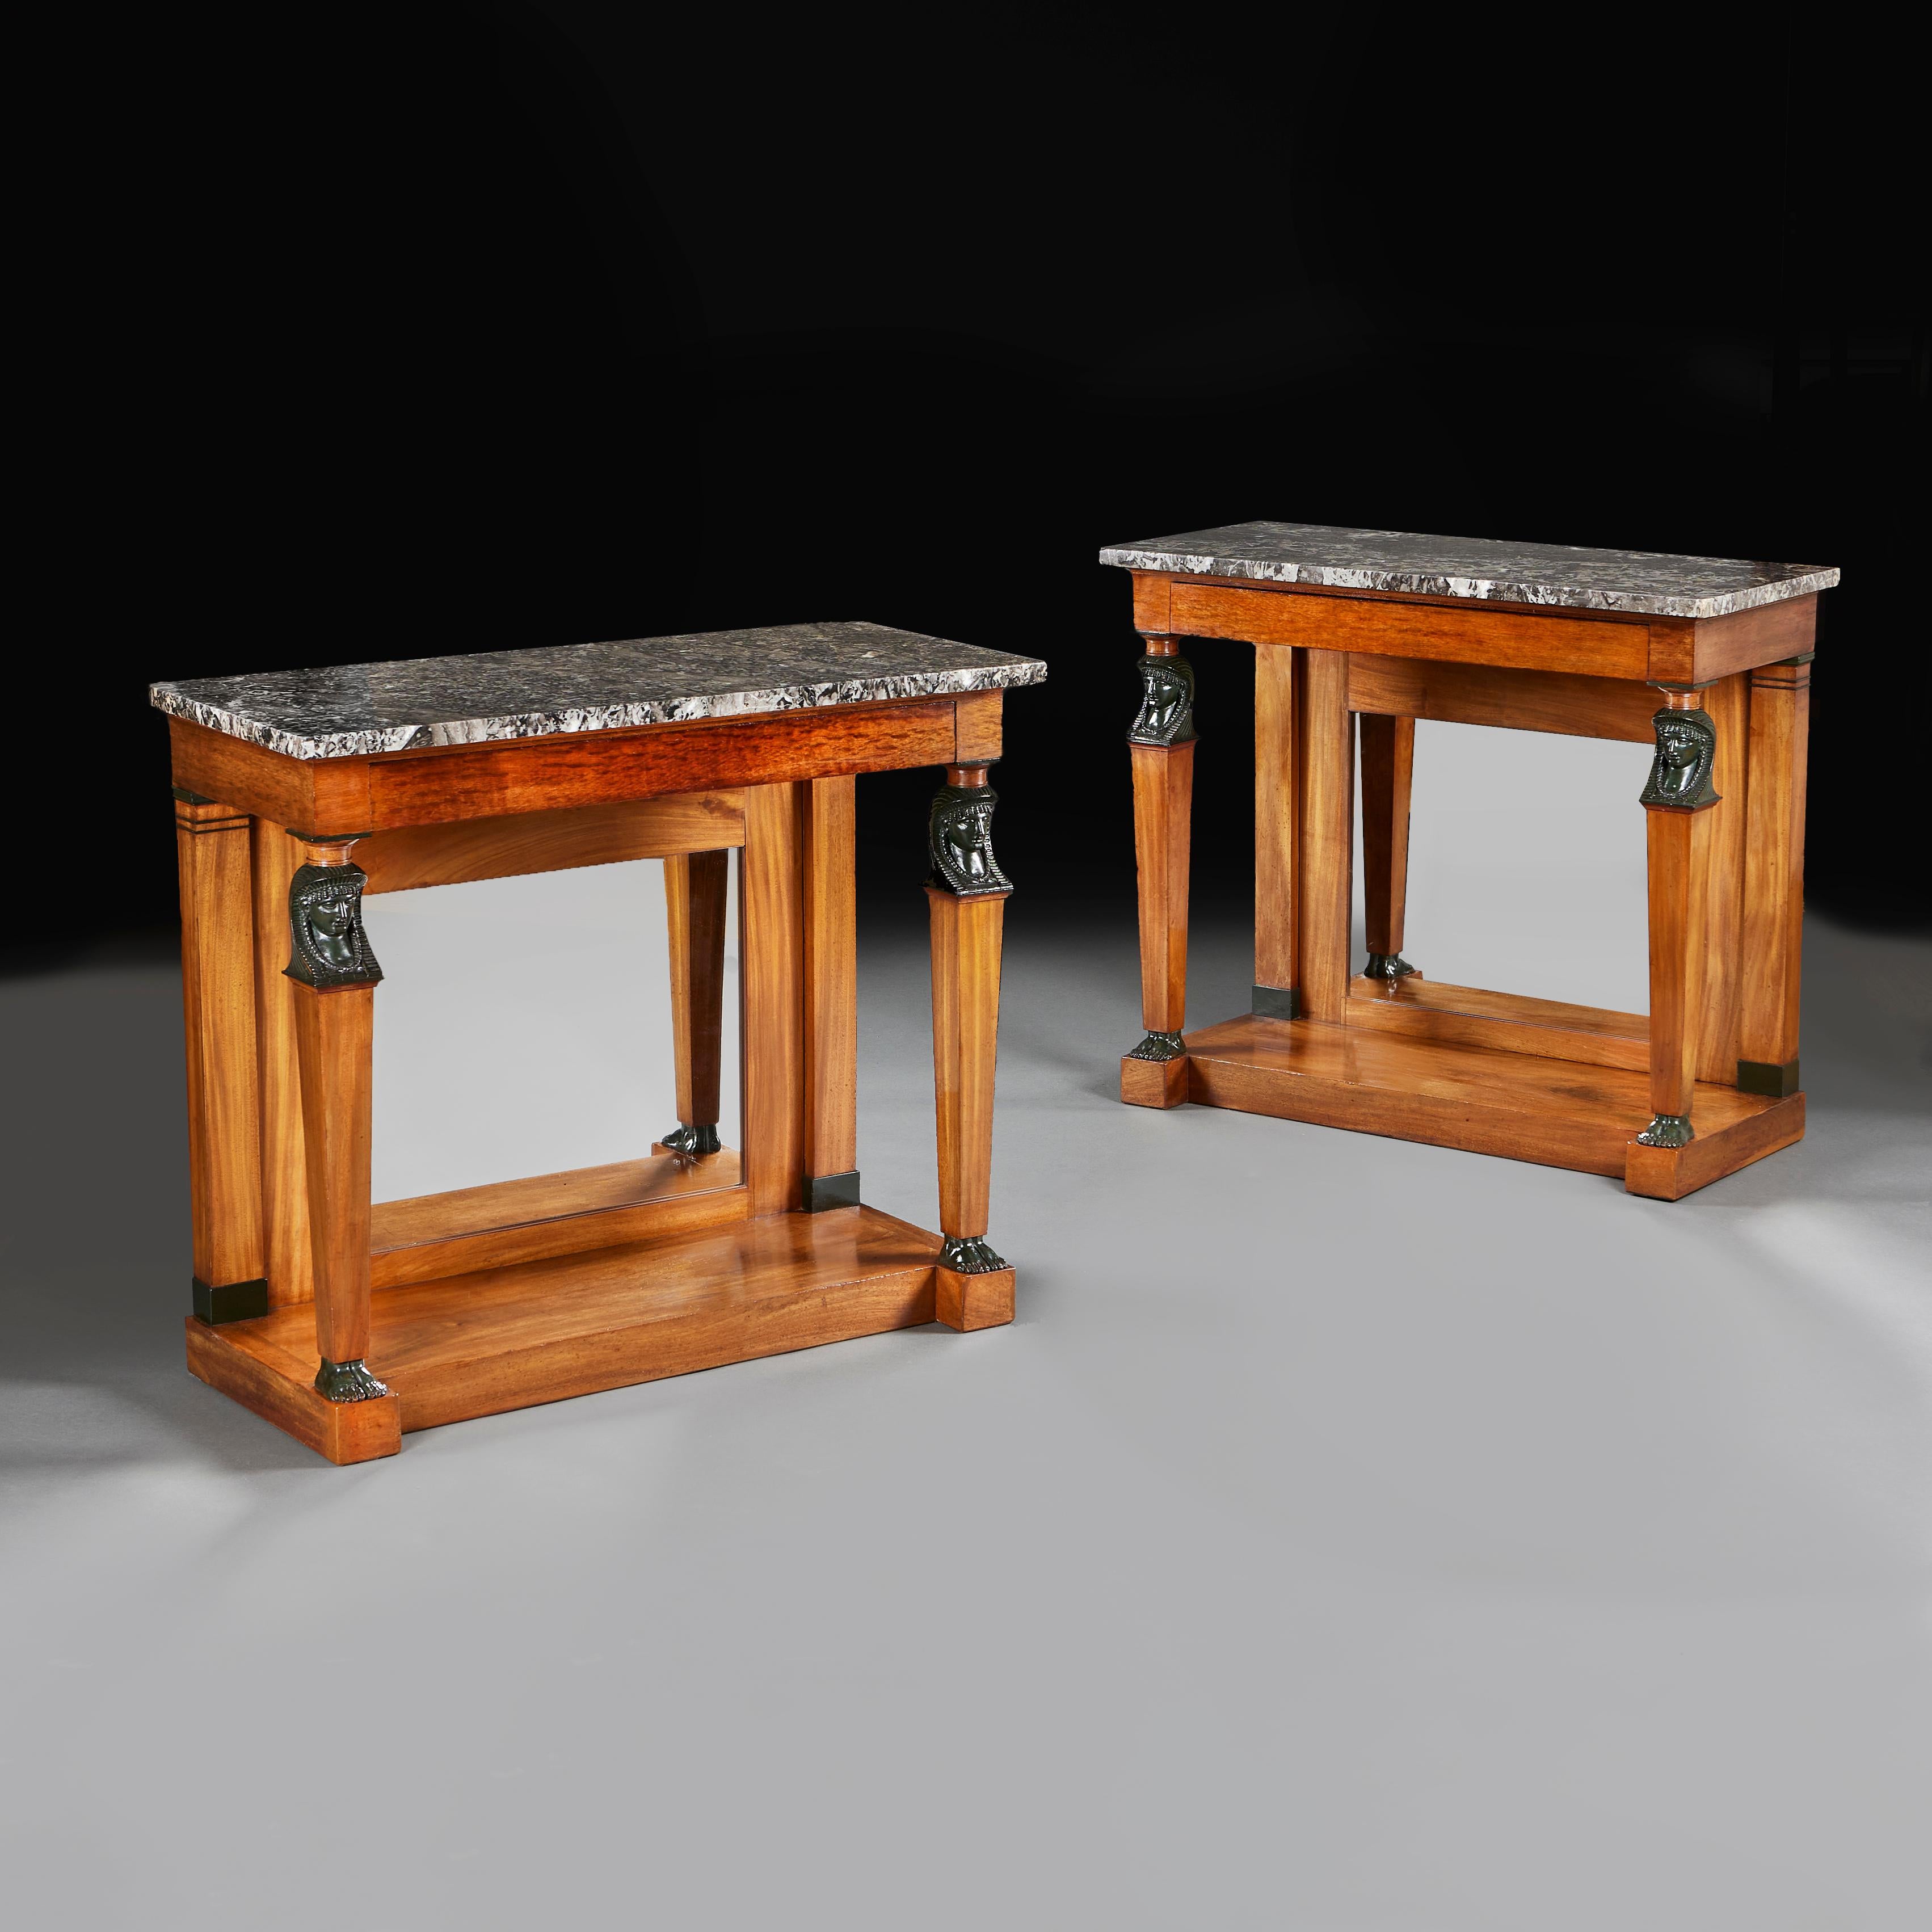 A fine pair of early nineteenth century Empire console tables of faded Honduran mahogany, retaining the original inset mirrored backs, the supporting legs with finely carved Egyptian caryatids to the top, tapering down to delicate feet at the base,